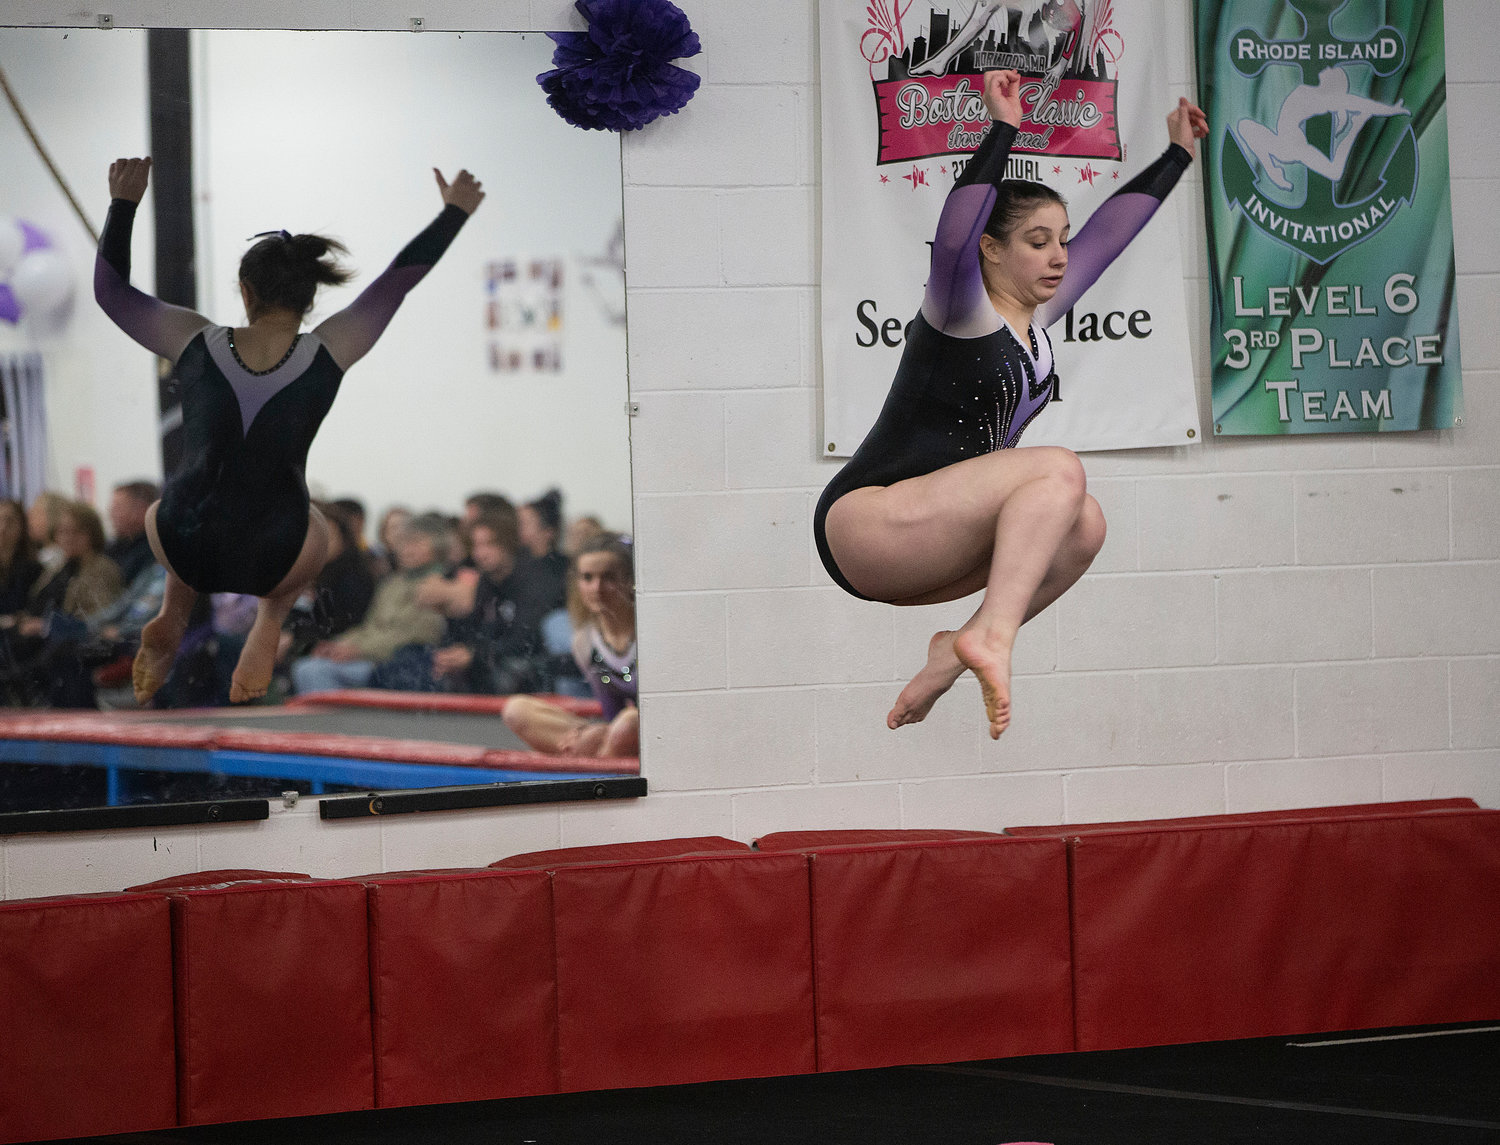 Isabella Brando performs a jump during her floor routine.